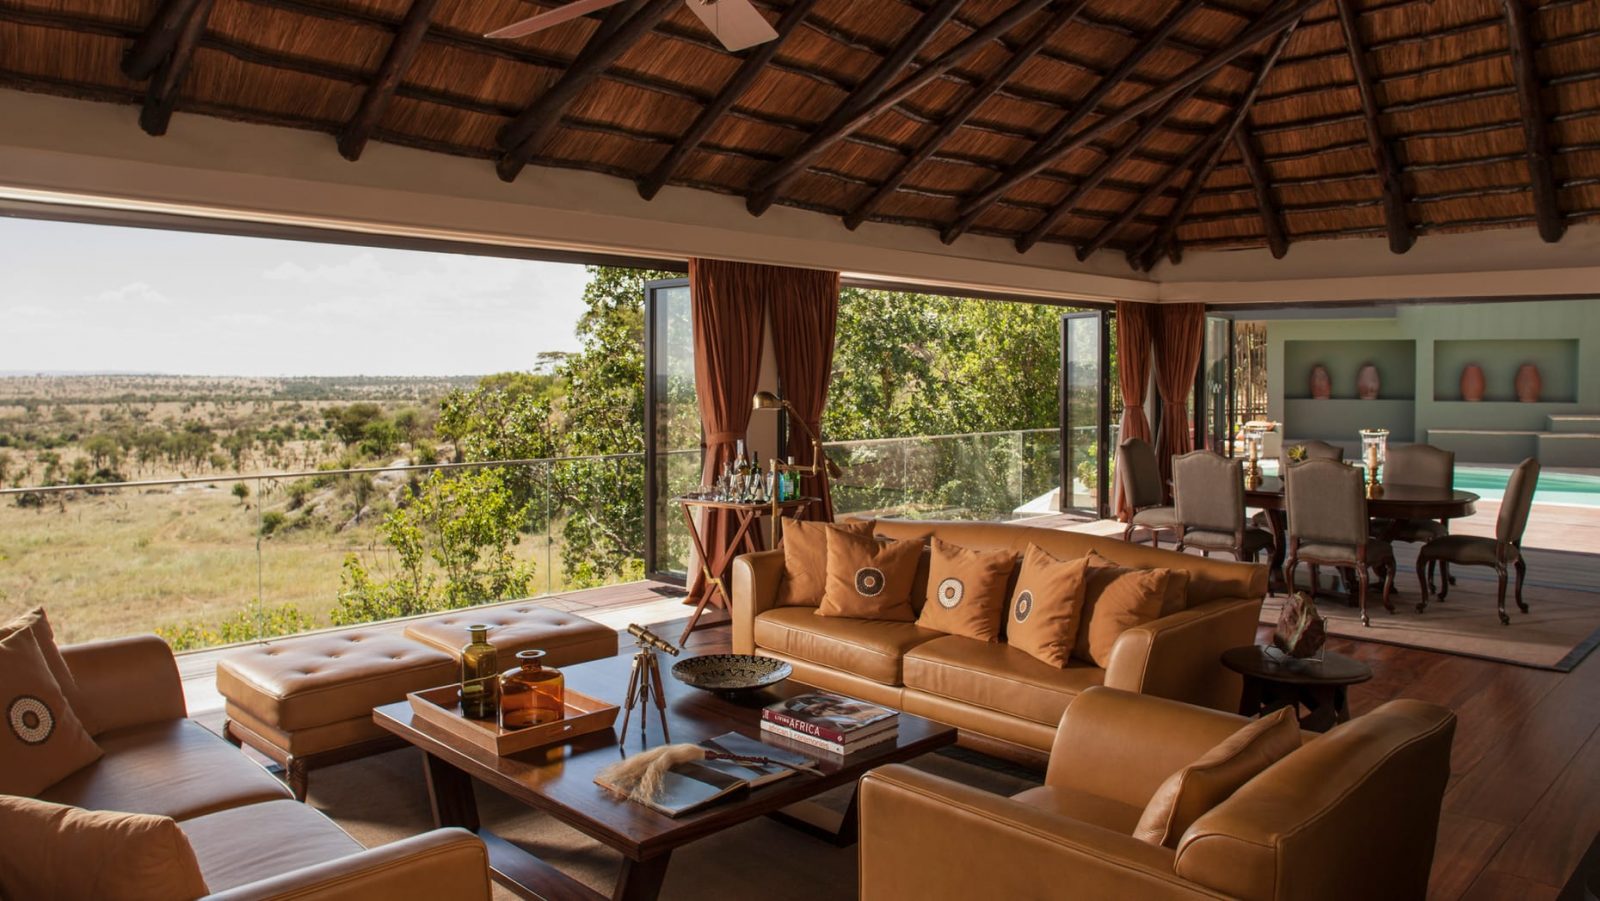 The Arusha lodge, complete with sofas and brunch tables